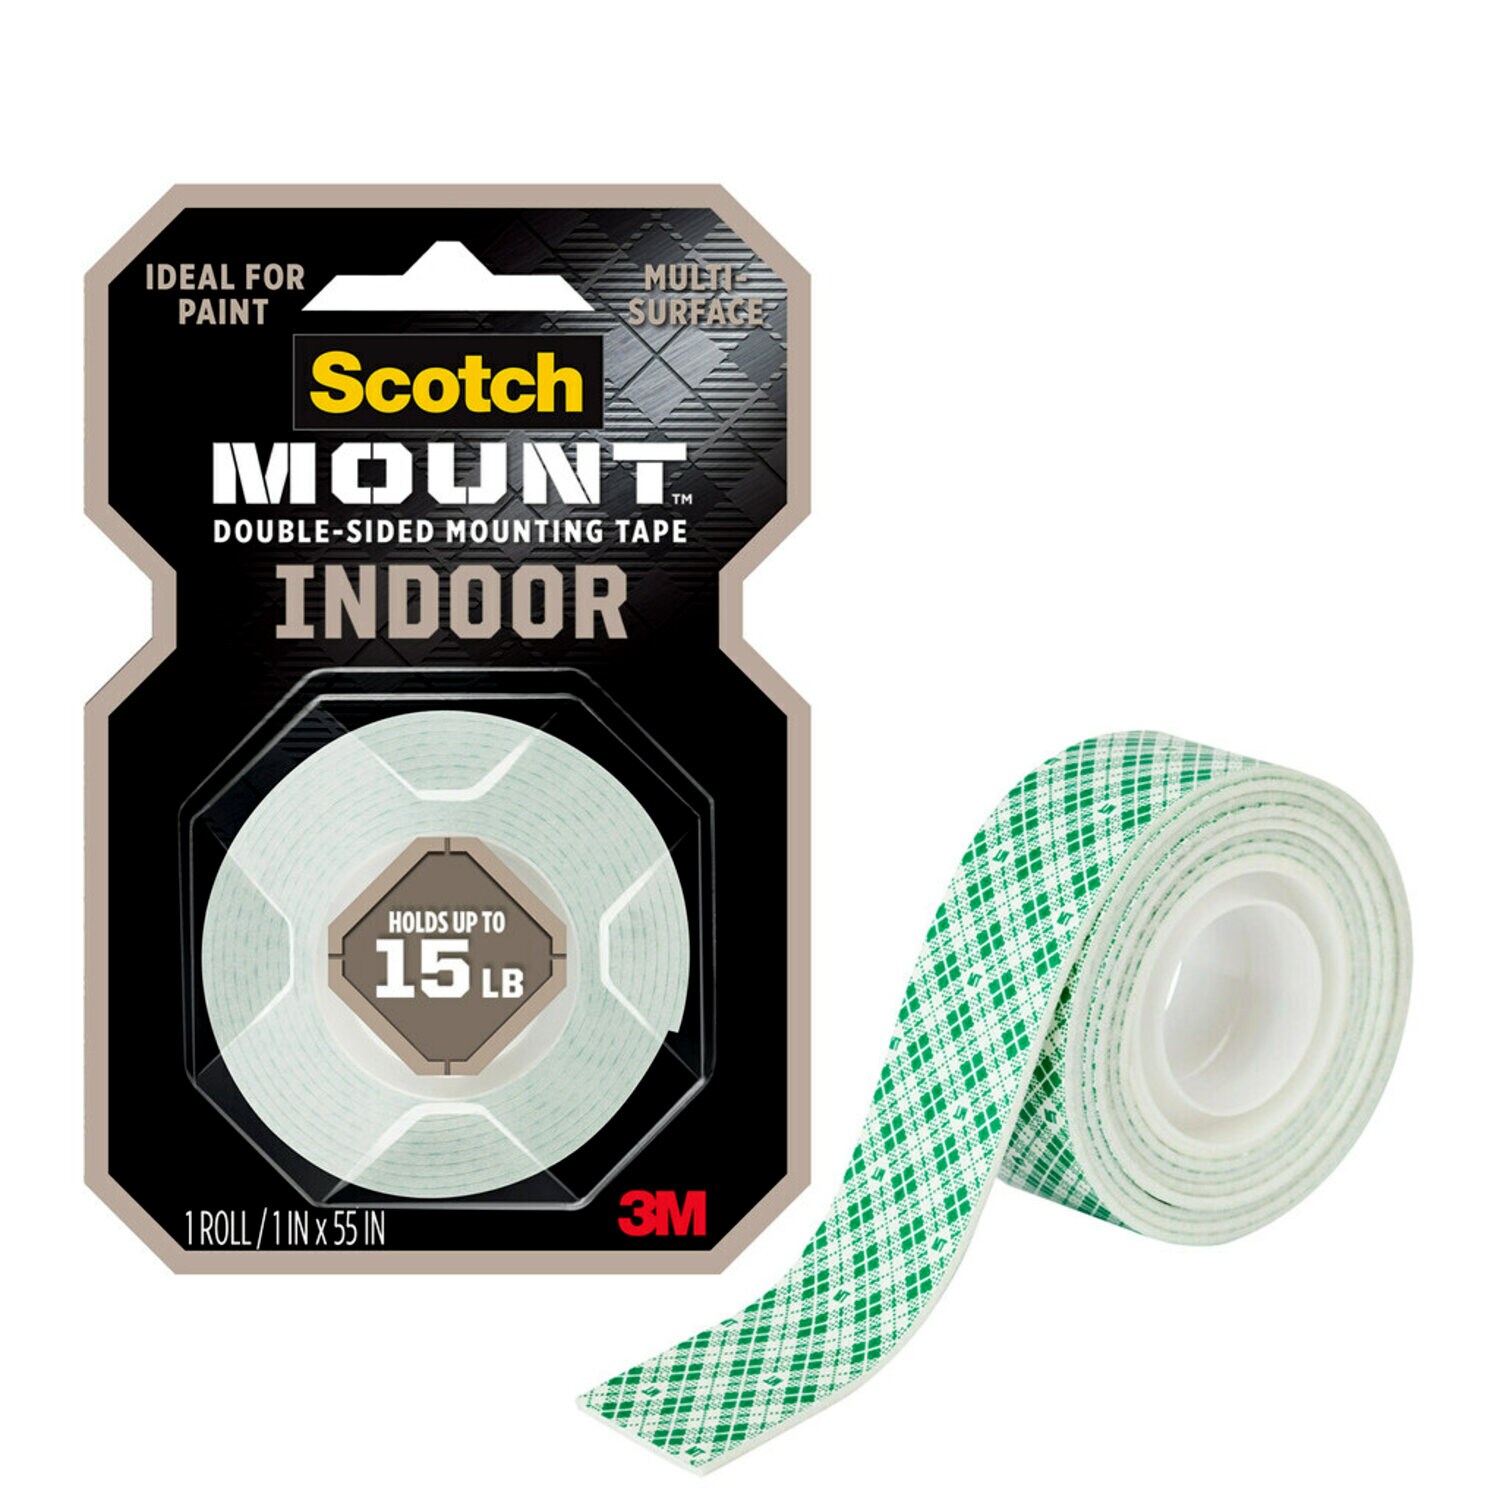 7100205649 - Scotch-Mount Indoor Double-Sided Mounting Tape 214H, 1 In X 55 In (2,54
Cm X 1,39 M)